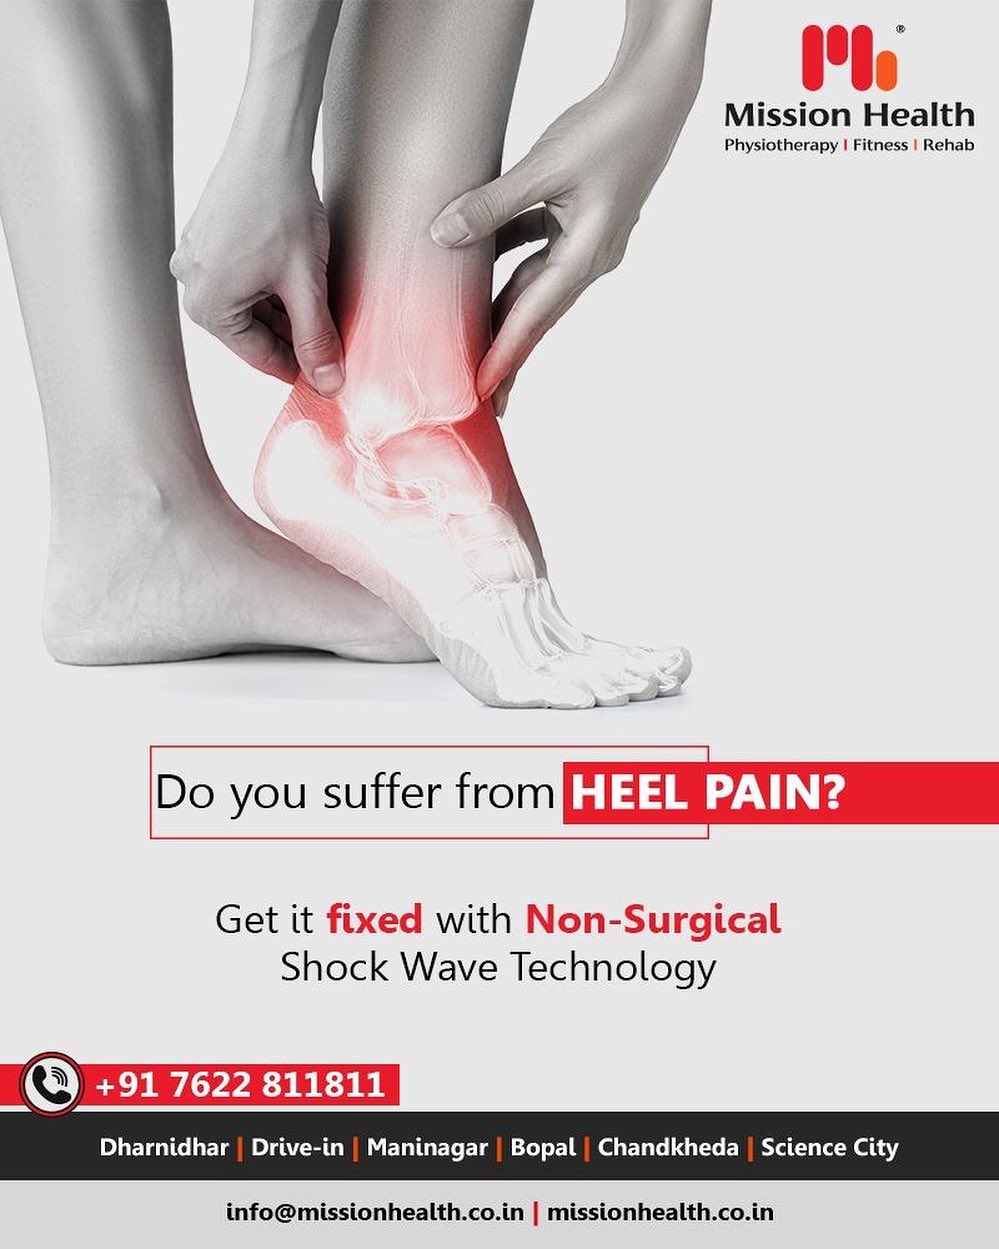 Connect for flat foot solution is not right Keep - Foot issues

#Footclinic #NonSurgicalPainManagement #orthotics #MissionHealth #MissionHealthIndia #AbilityClinic #MovementIsLife